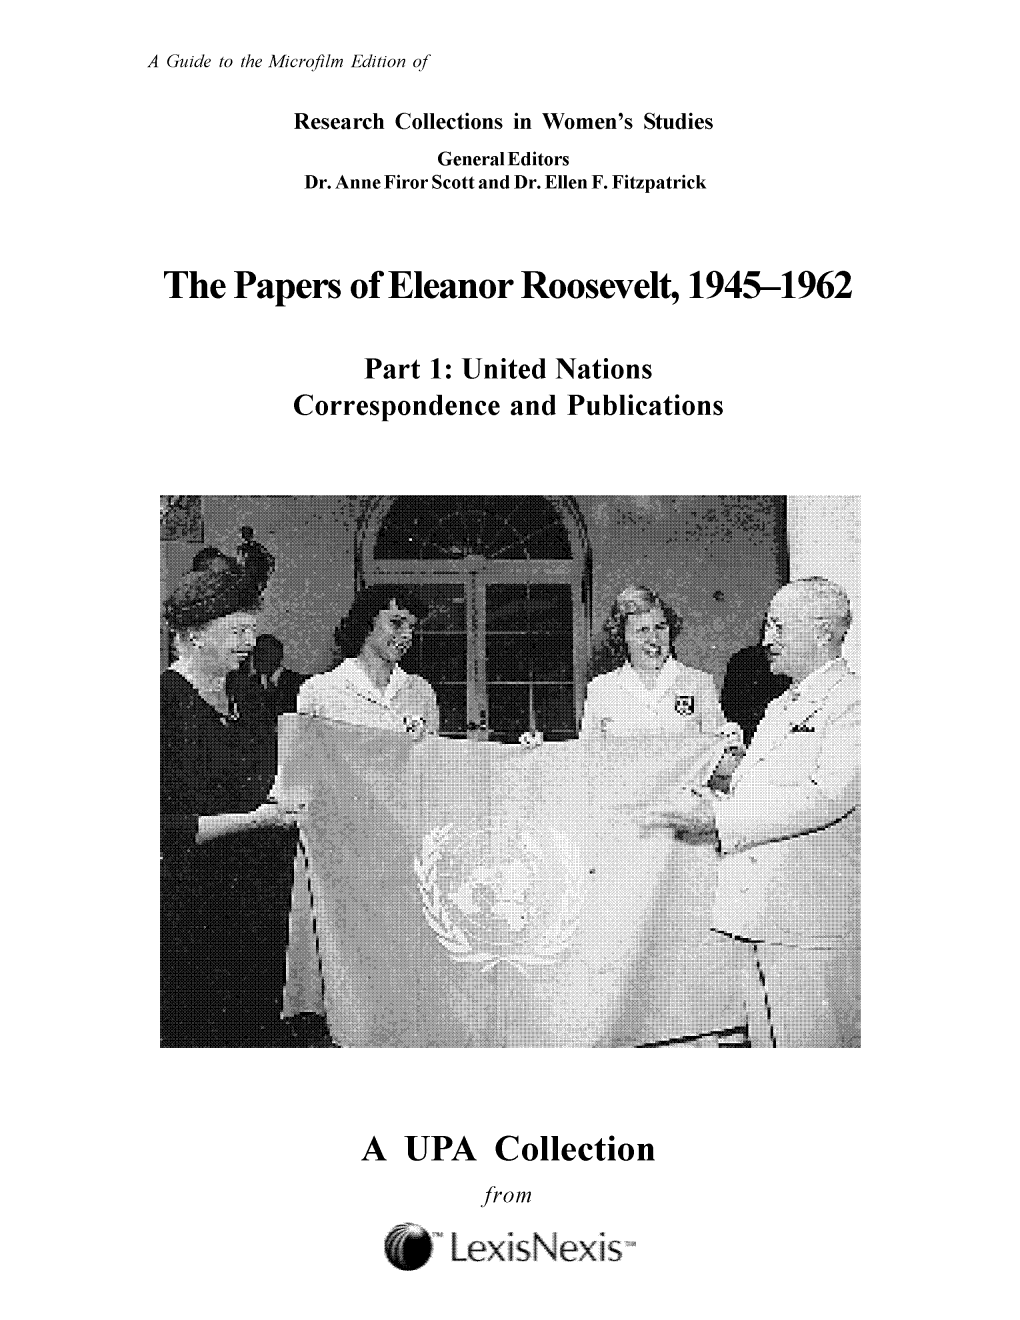 The Papers of Eleanor Roosevelt, 1945-1962